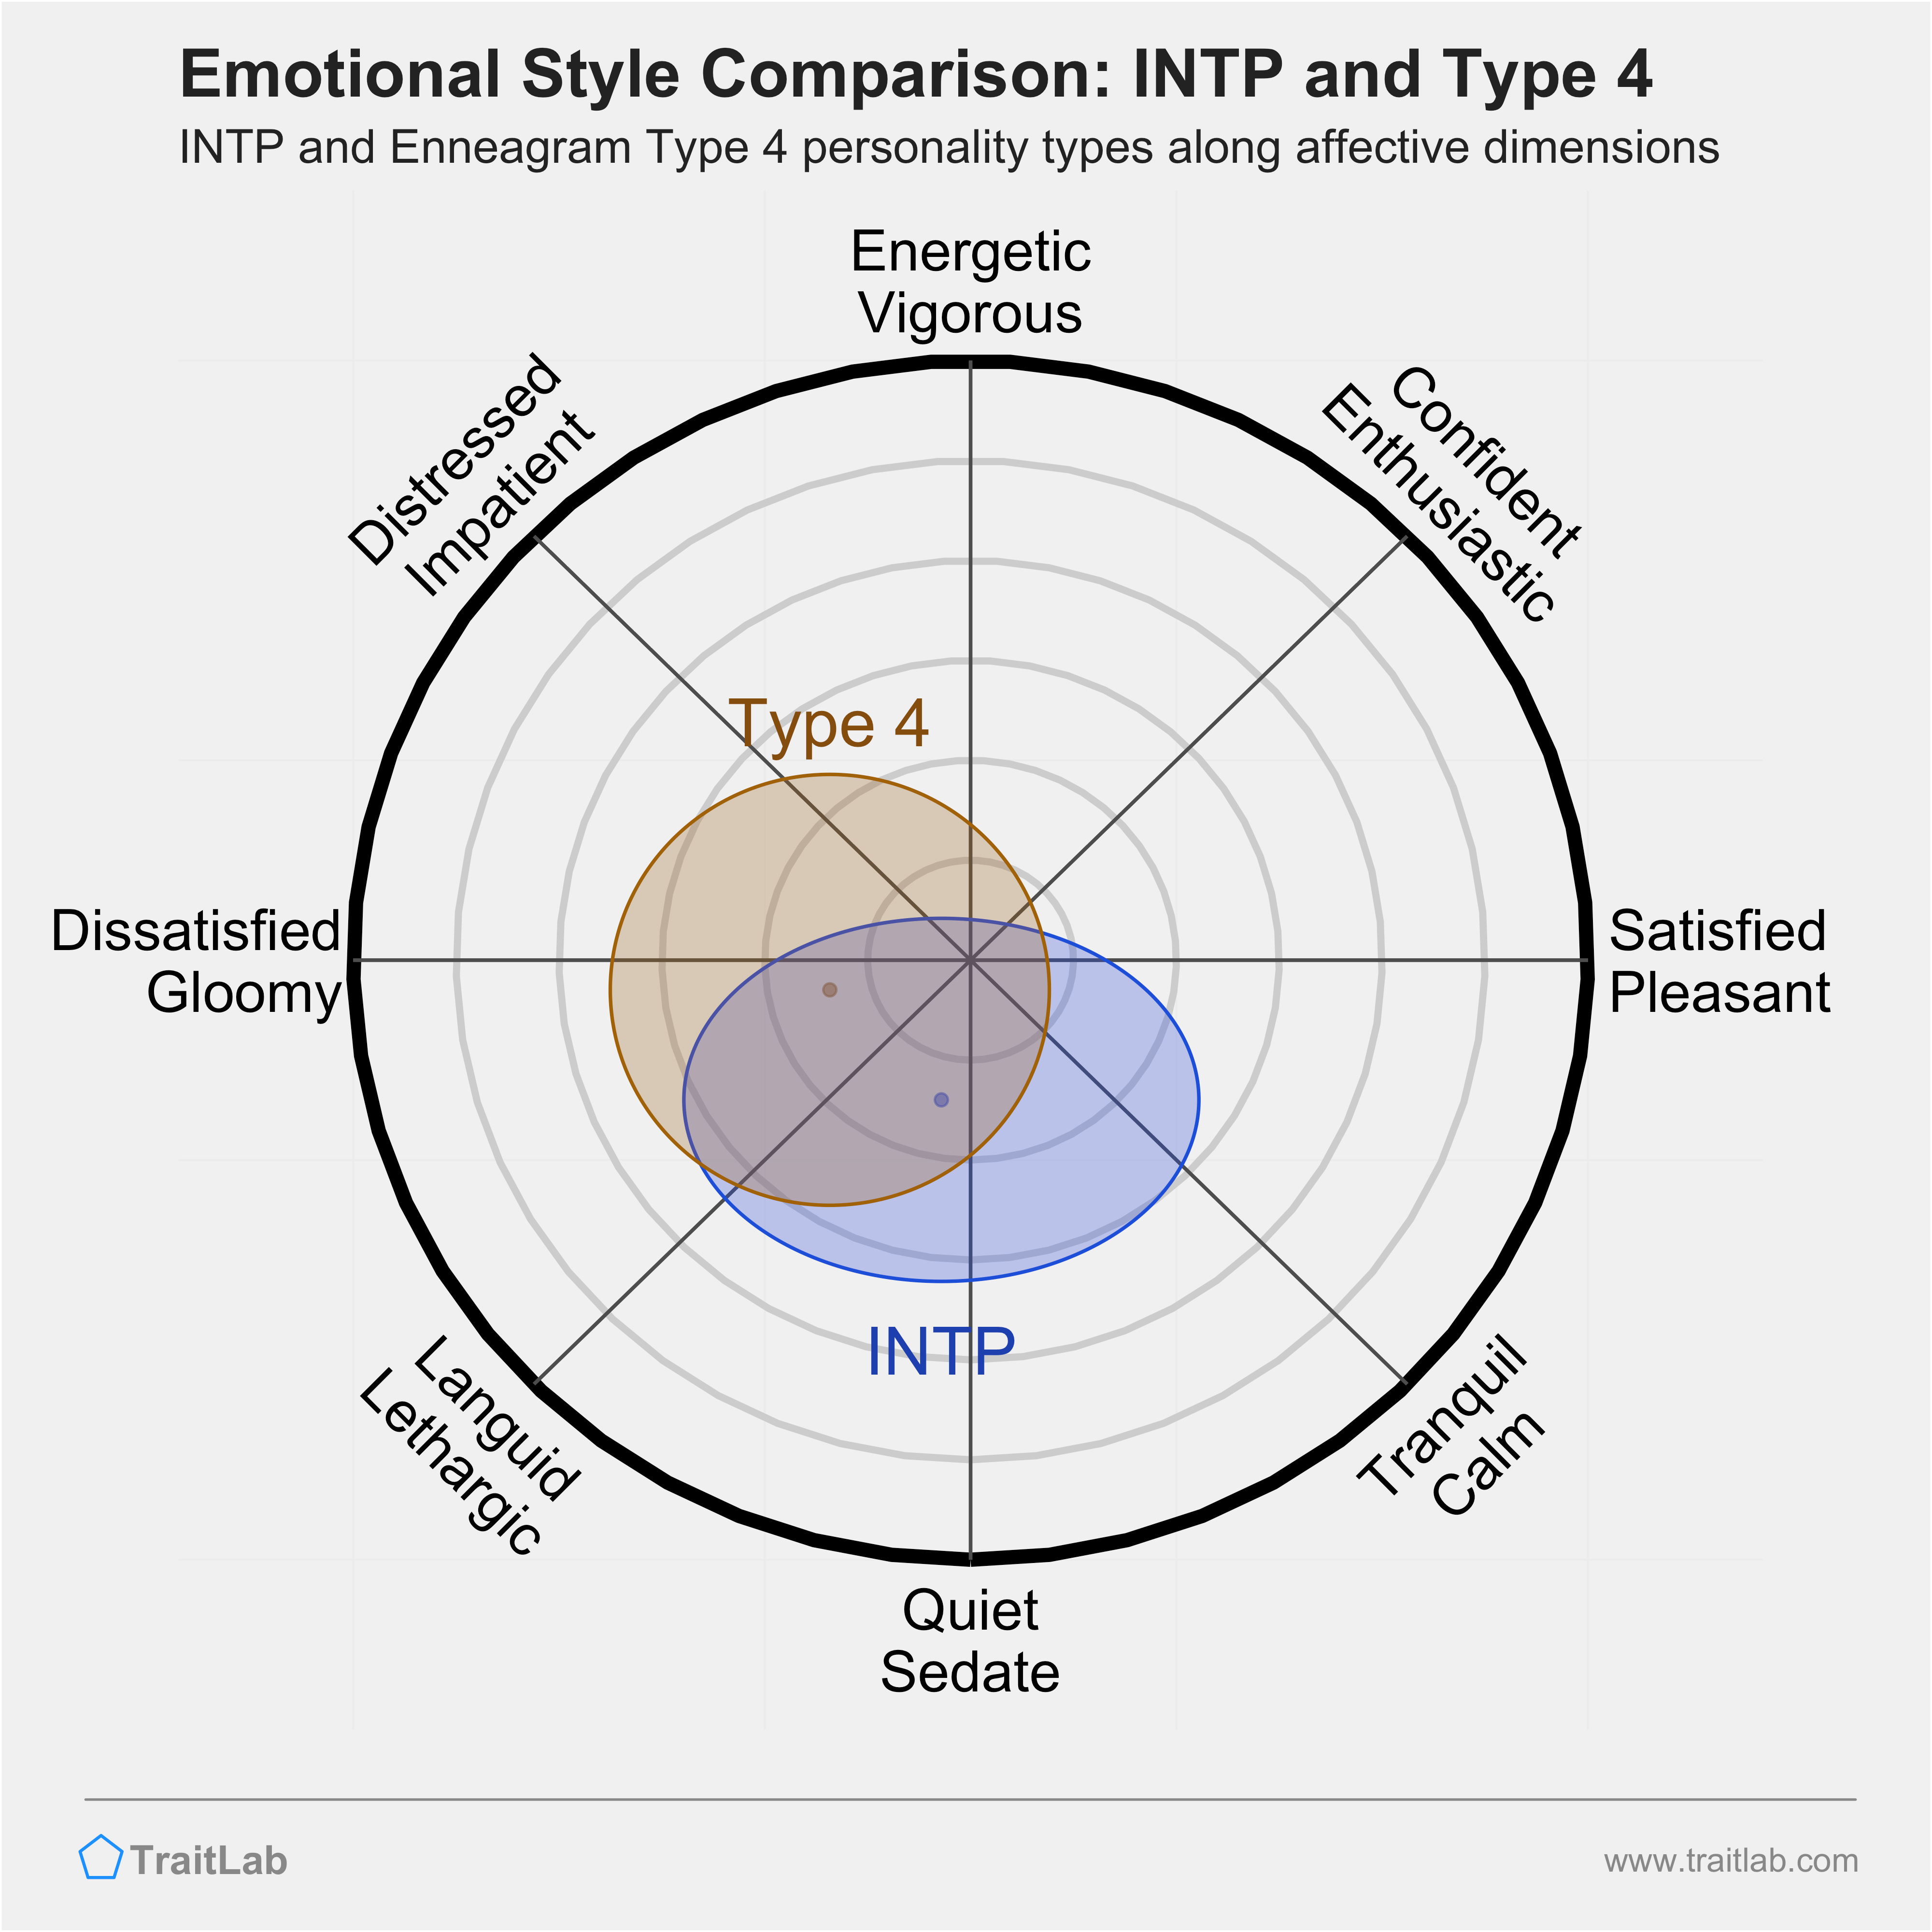 INTP and Type 4 comparison across emotional (affective) dimensions